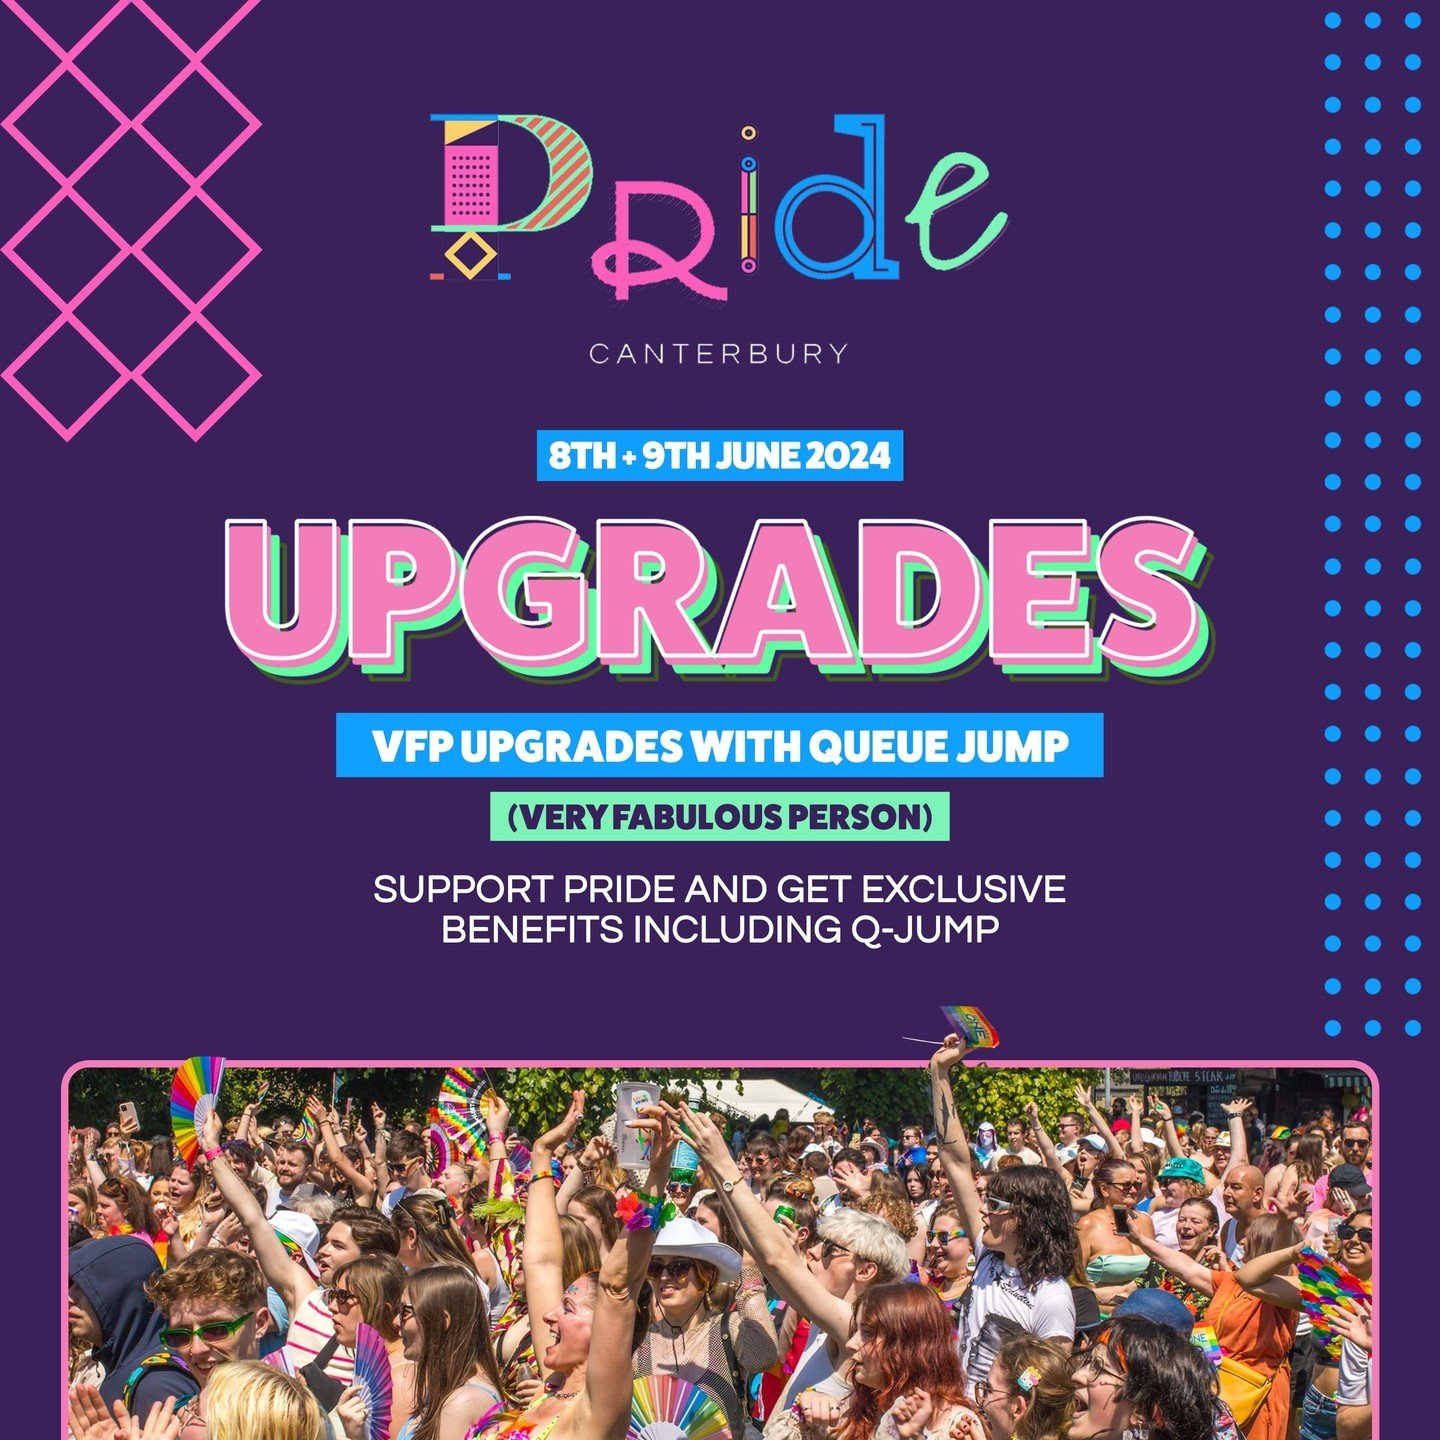 VFP upgrades now available 🤩 Sat 8th + Sun 9th June 2024! LINK IN BIO 😍 Become a Very Fabulous Person today and get:
✨ Q-Jump Access
🍹 Complimentary Pride Souvenir Cup
🌟 Exclusive Pride 2024 Supporters Wristband
🏨 Entry into a Prize Draw